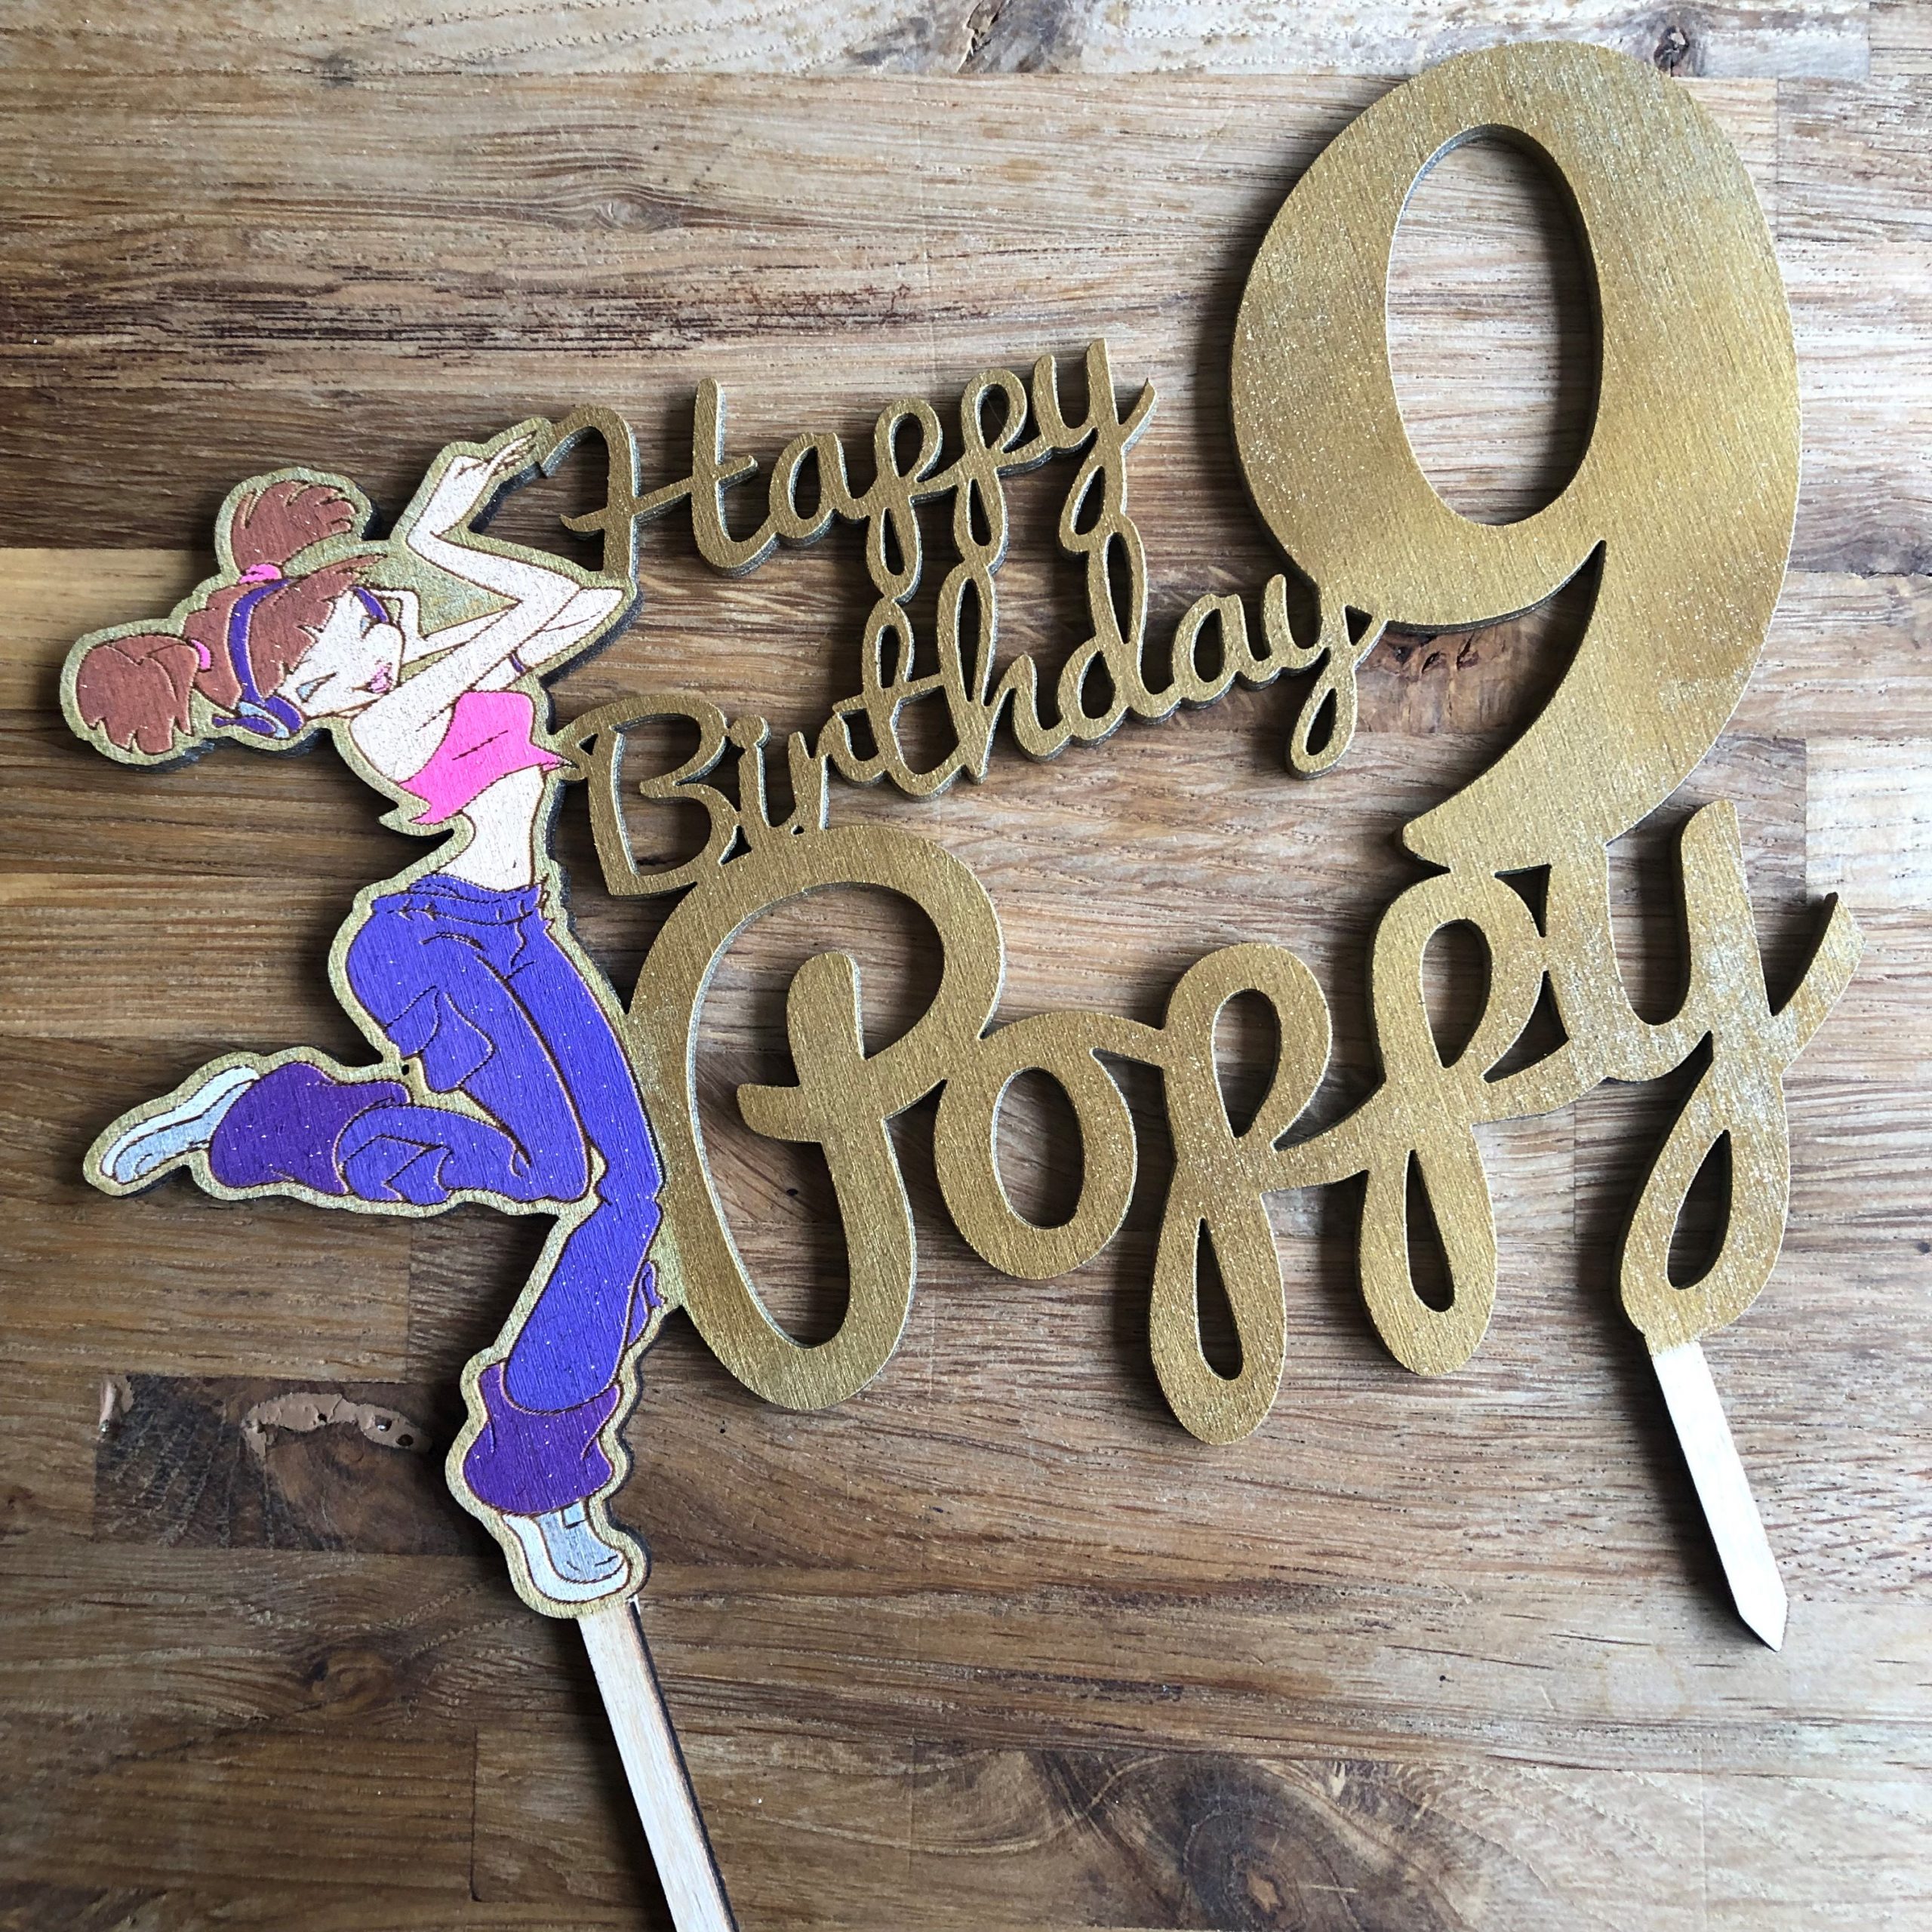 New Happy Fathers Day Personalised Cake Toppers Topper Best Dad Ever Personalised  Cake Toppers Decoration Party Decoration Personalised Cake Toppers  Decorating Baking Tools I Love Dad From Telmom, $3.57 | DHgate.Com